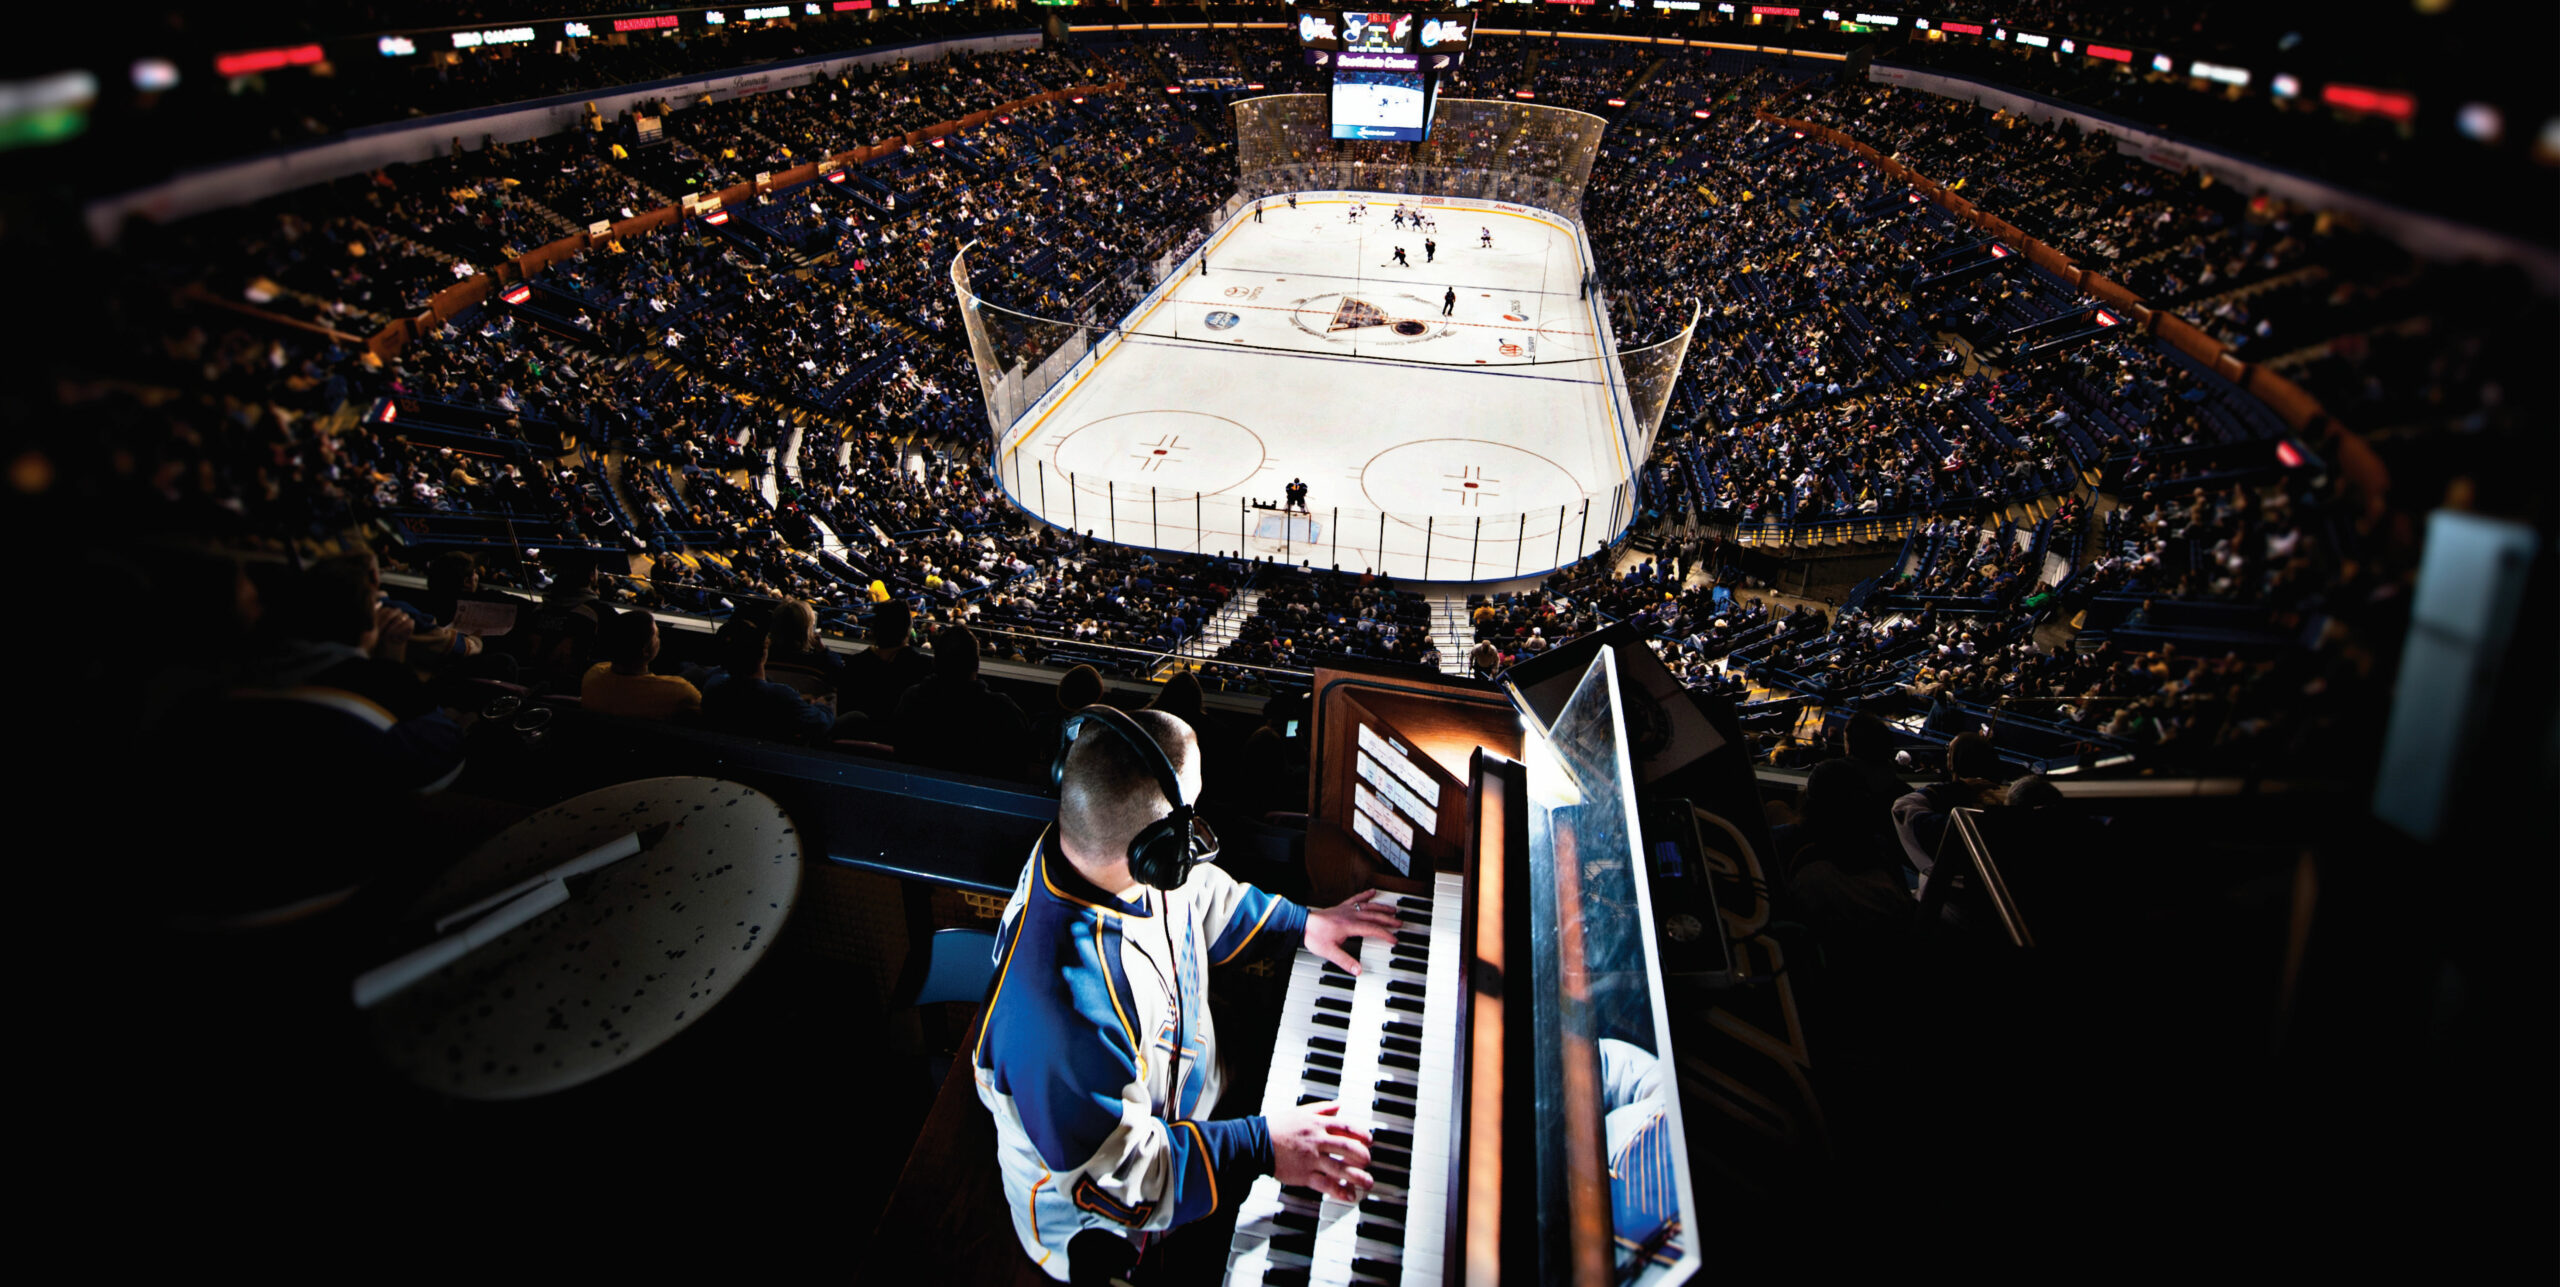 Jeremy Boyer, organist for the St. Louis Blues, watches a play during a Blues game. Used with permission.